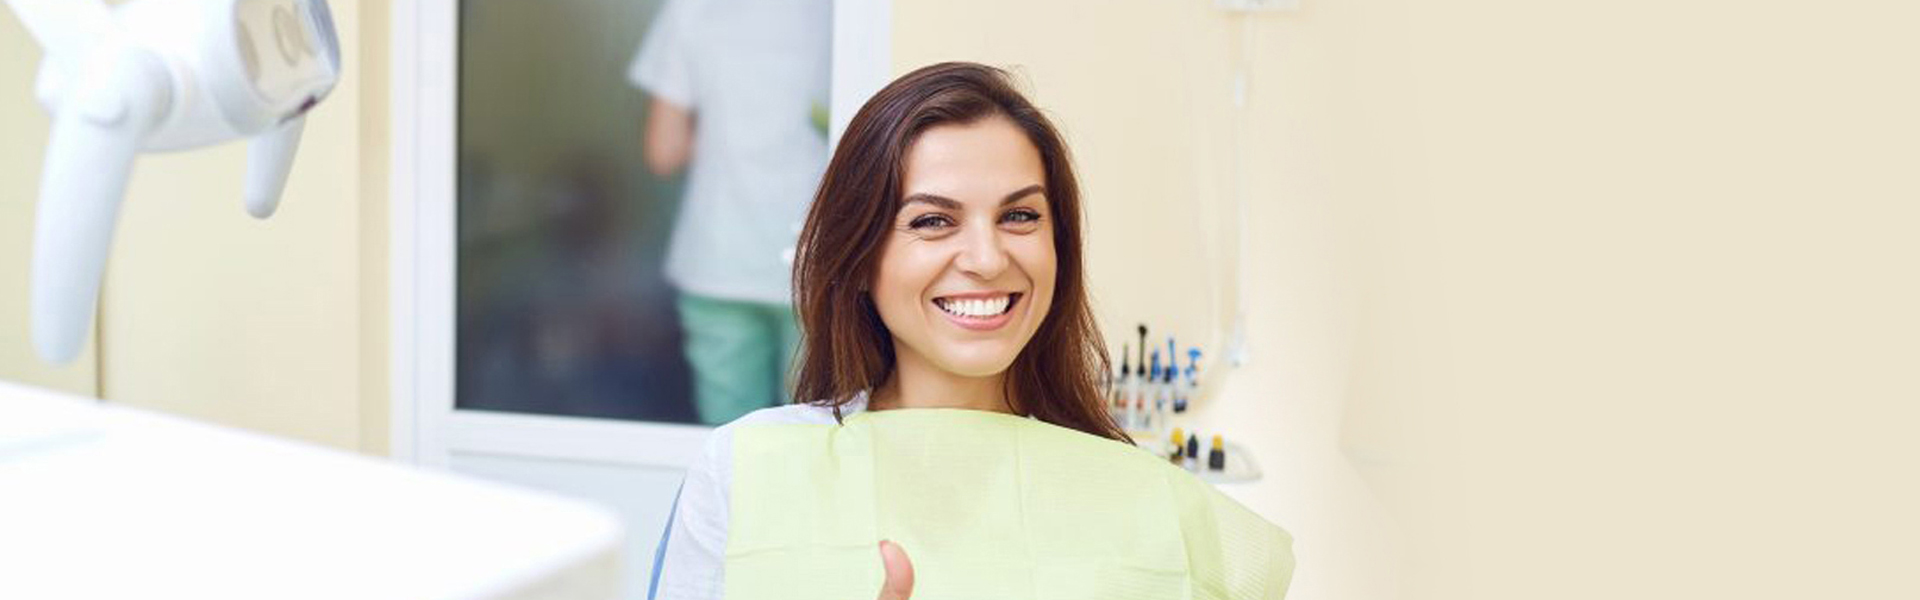 Smiling lady on dentist's chair